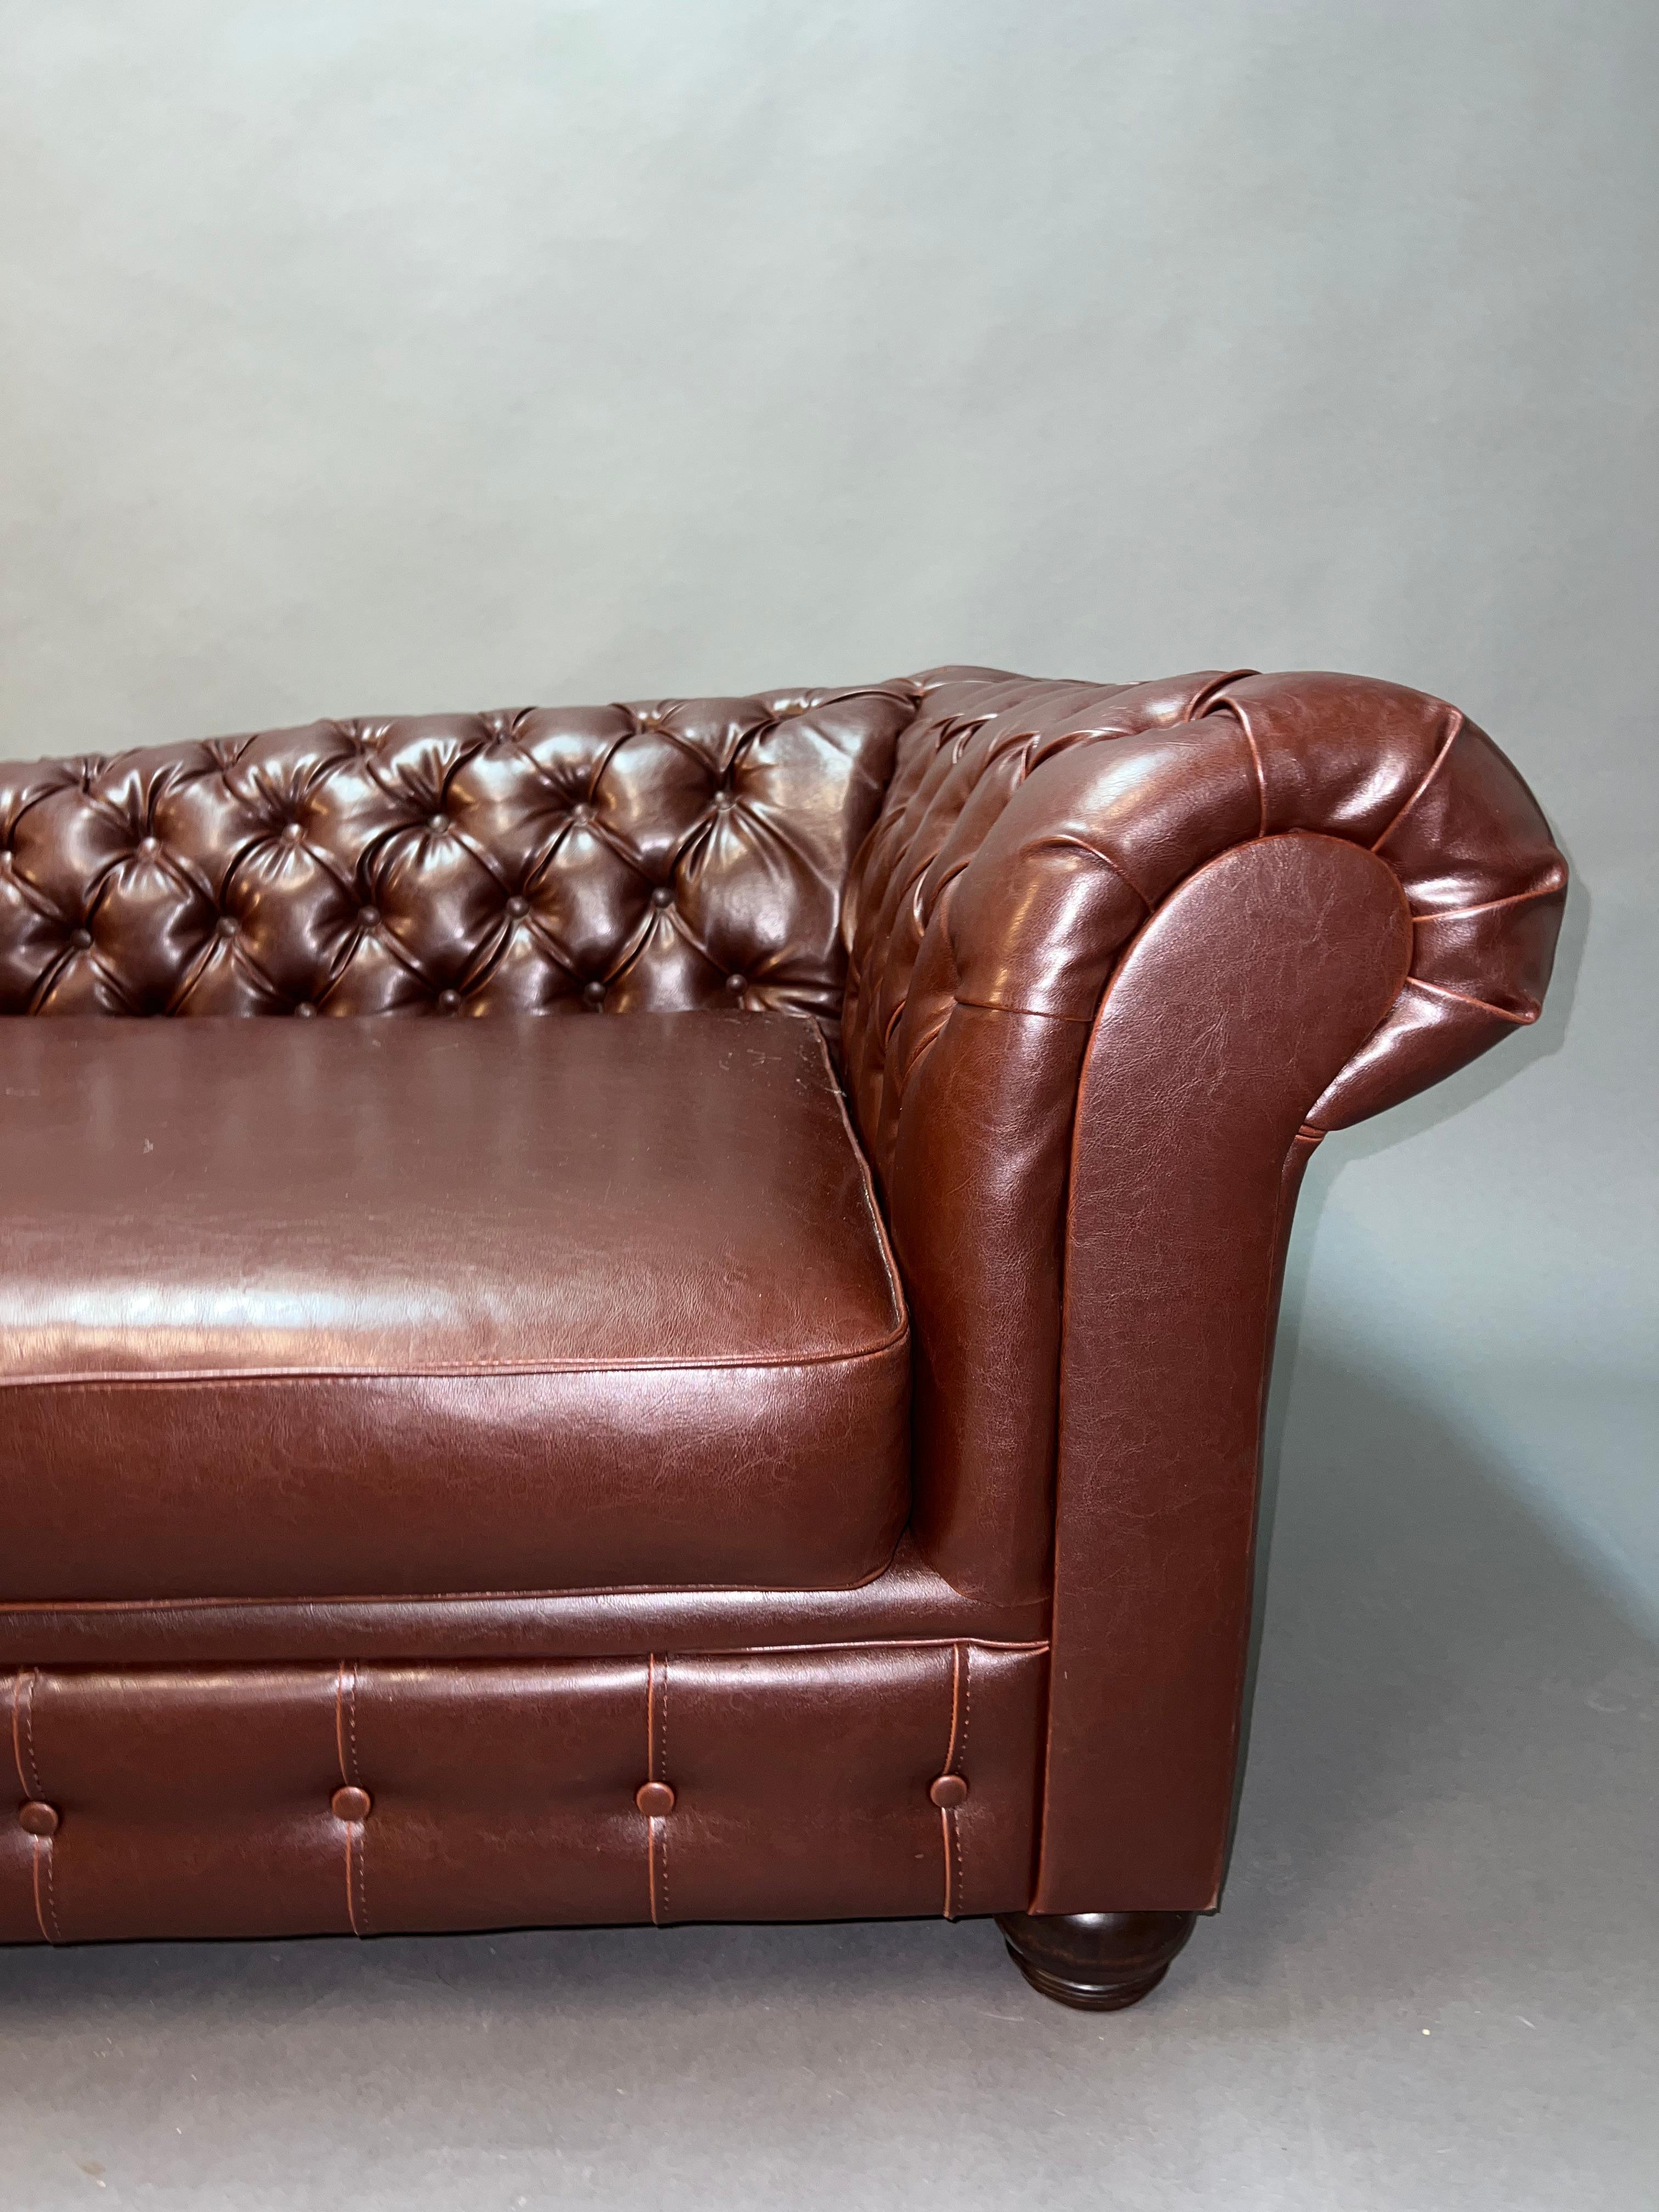 Lovely Vintage Chesterfield Brown Leder Look Chaise Lounge Daybed Sofa (20. Jahrhundert) im Angebot